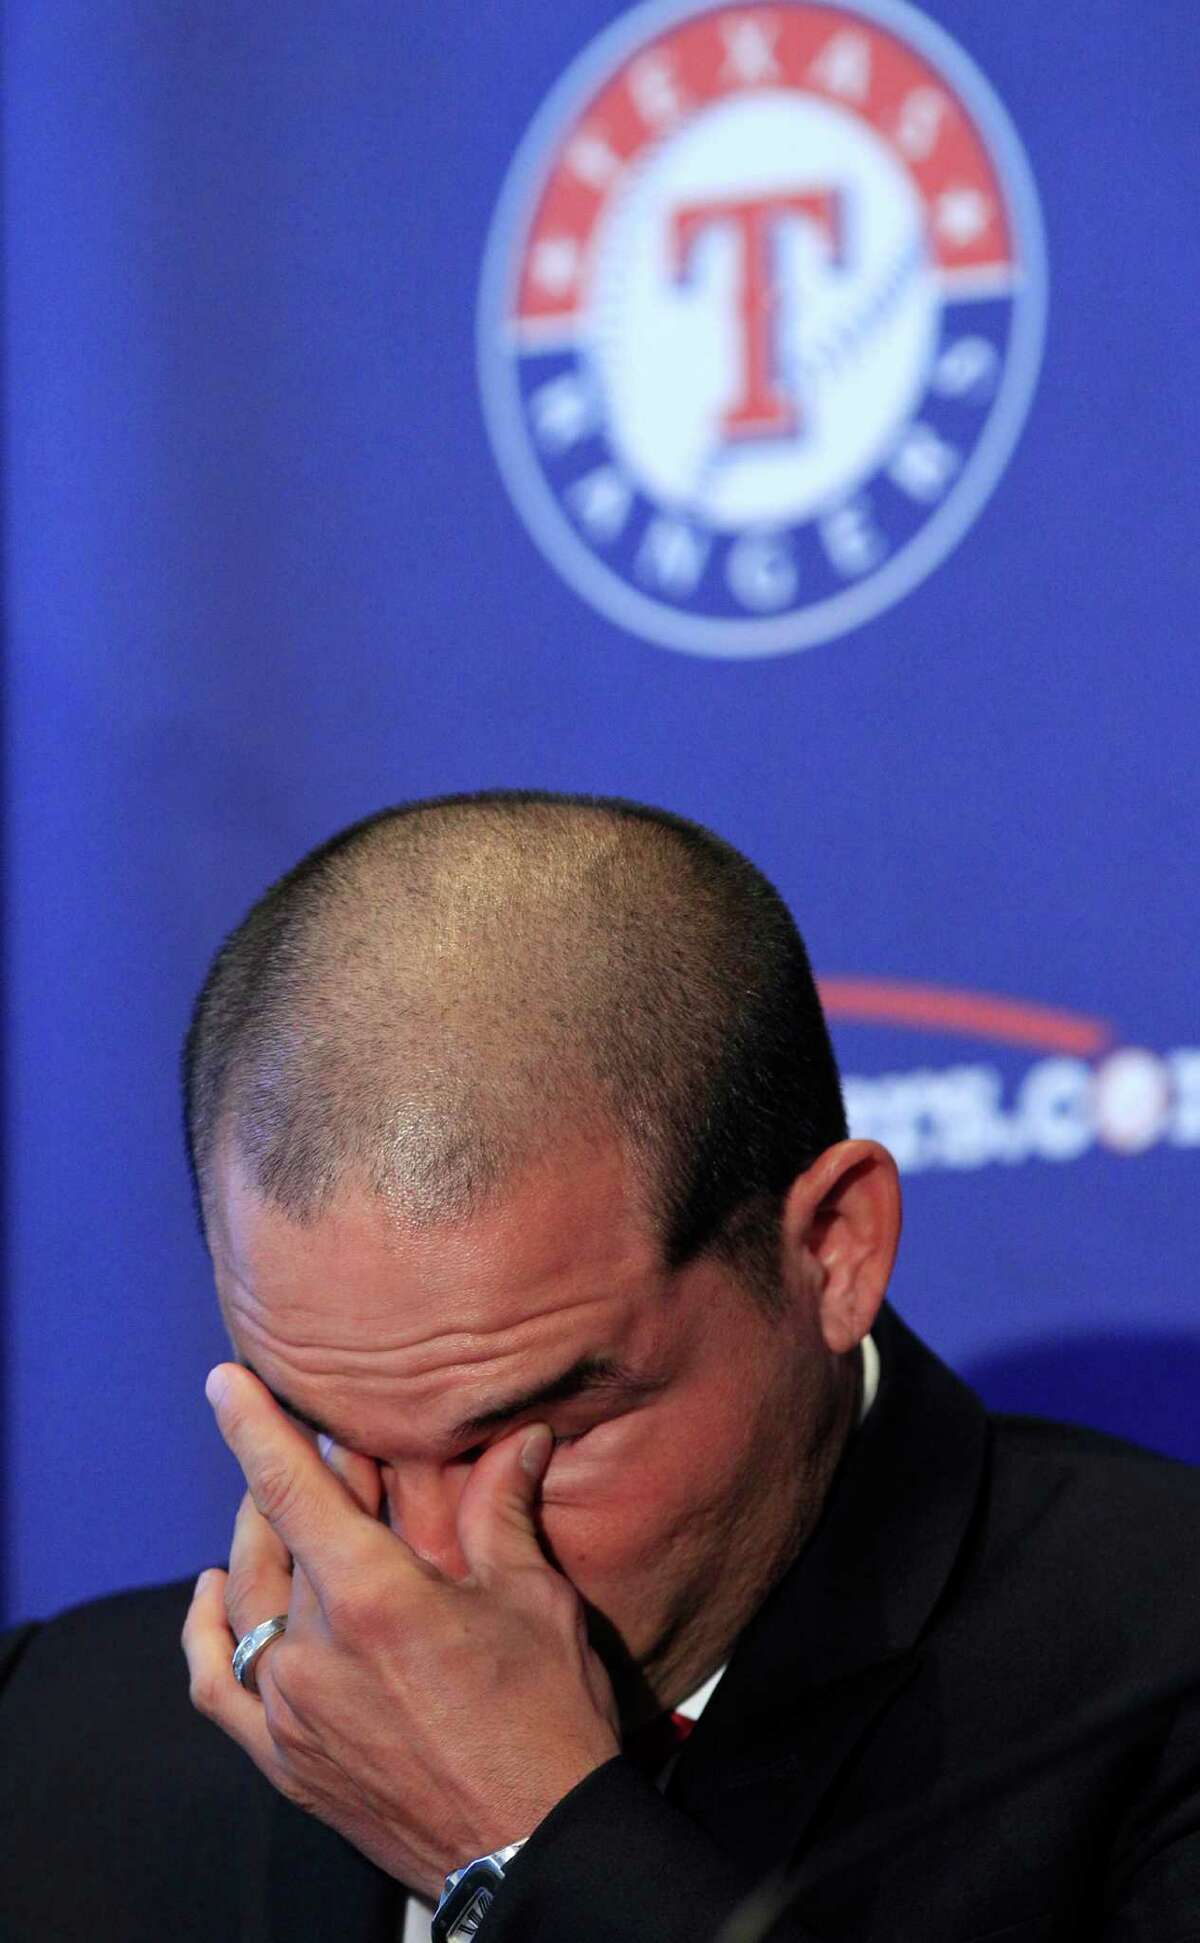 Former Texas Rangers Ivan Rodriguez fights back tears during an introduction for a news conference announcing his retirement as a baseball player, Monday, April 23, 2012, in Arlington, Texas. It came nearly 21 years after the fan favorite known as Pudge made his major league debut as a 19-year-old with the Rangers. (AP Photo/LM Otero)